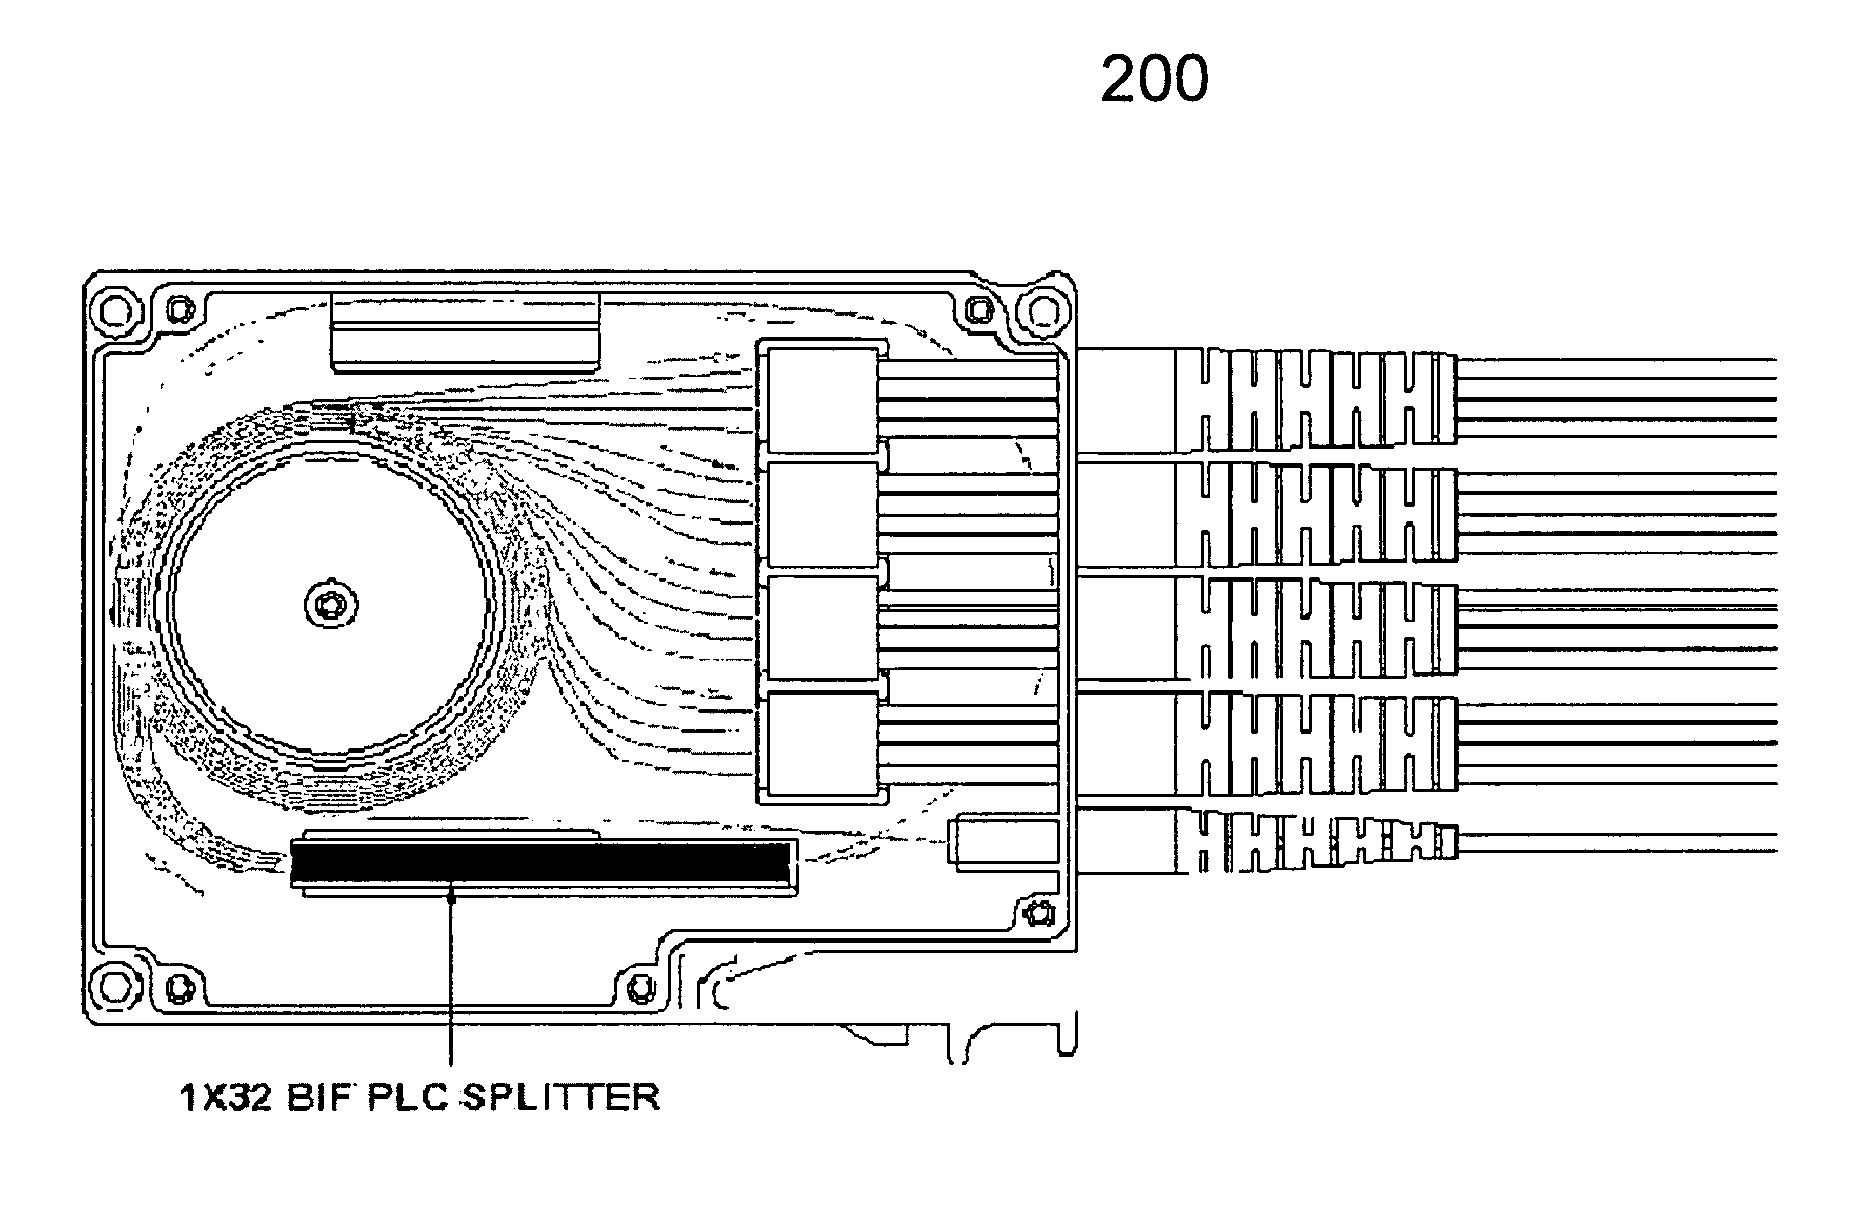 Structured fiber optic cassette with multi-furcated cable access